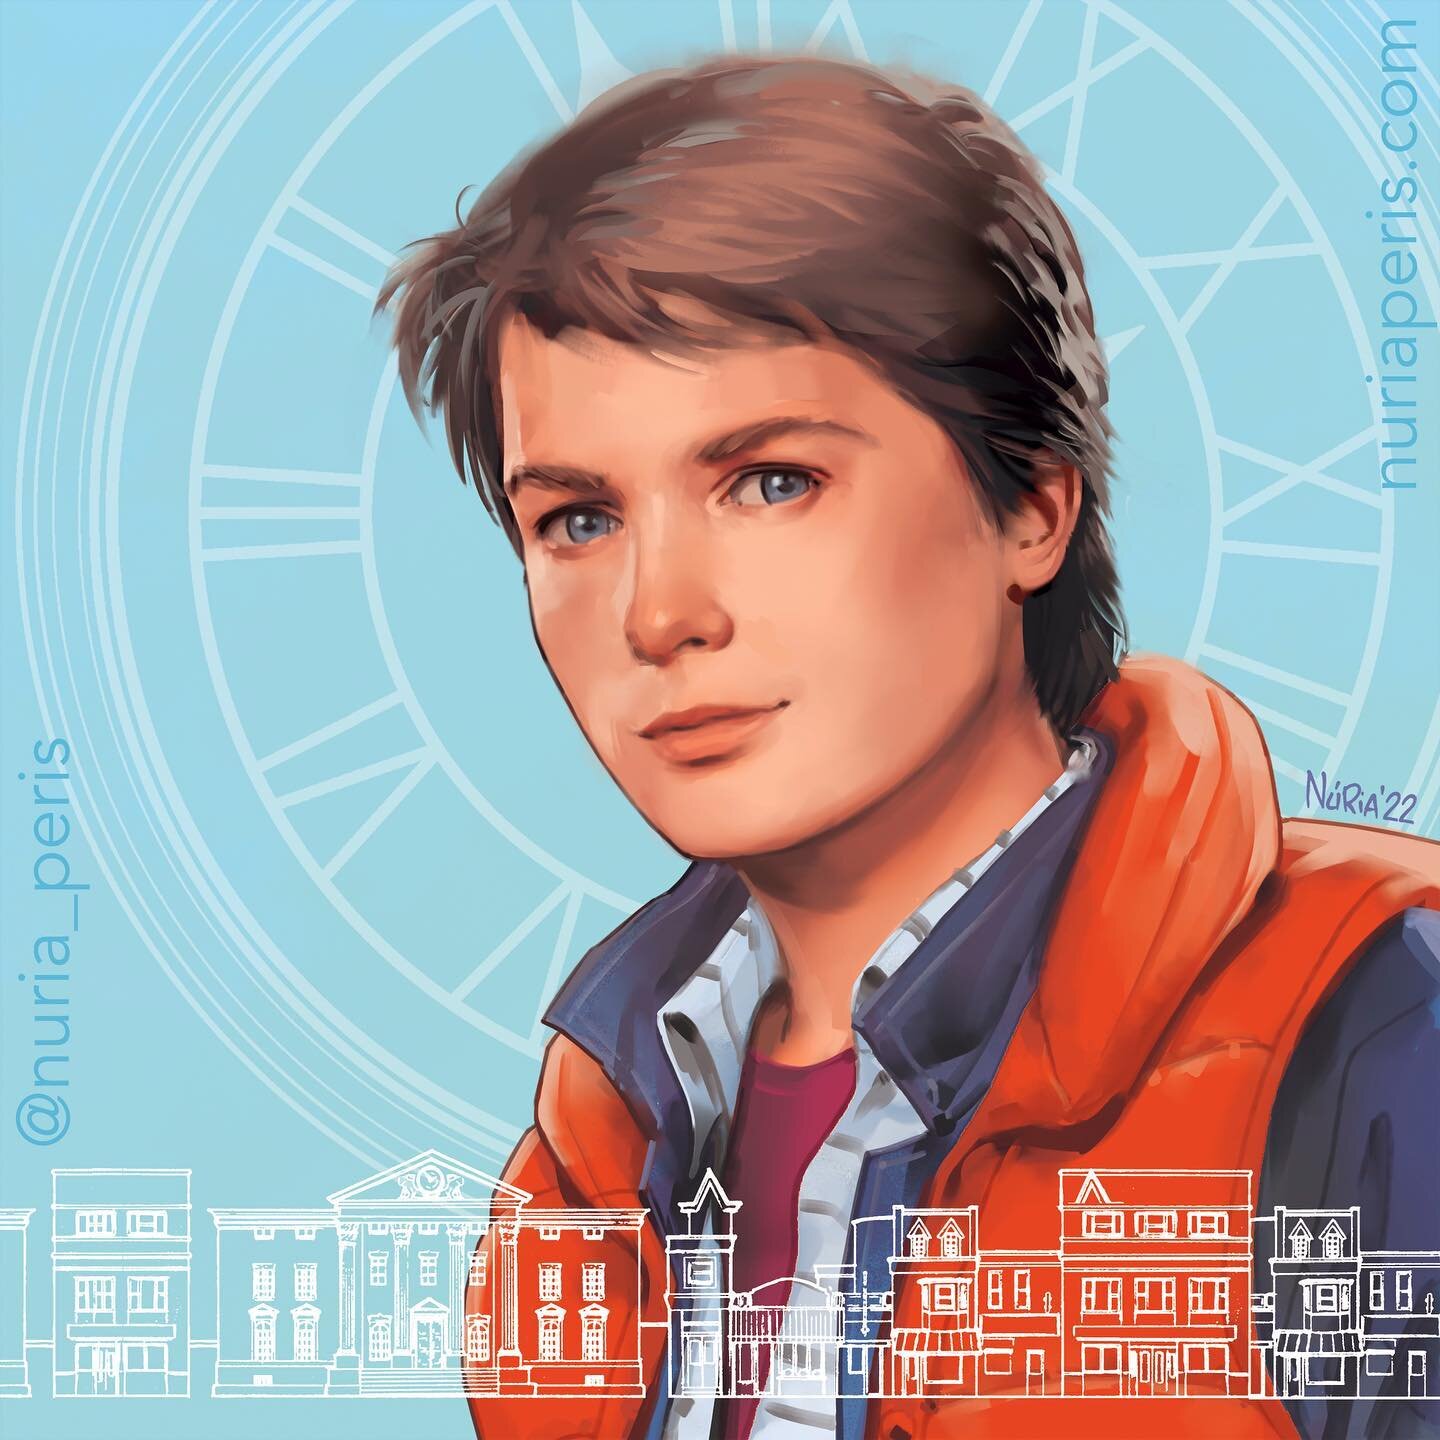 Michael J. Fox as Marty Mcfly in Back to the Future illustration fan art, meanwhile&hellip;
Back to the Future The Musical has won Best New Musical at the Olivier Awards 2022 three days ago. 🏆

Il&middot;lustraci&oacute; de Marty Mcfly, celebrant el